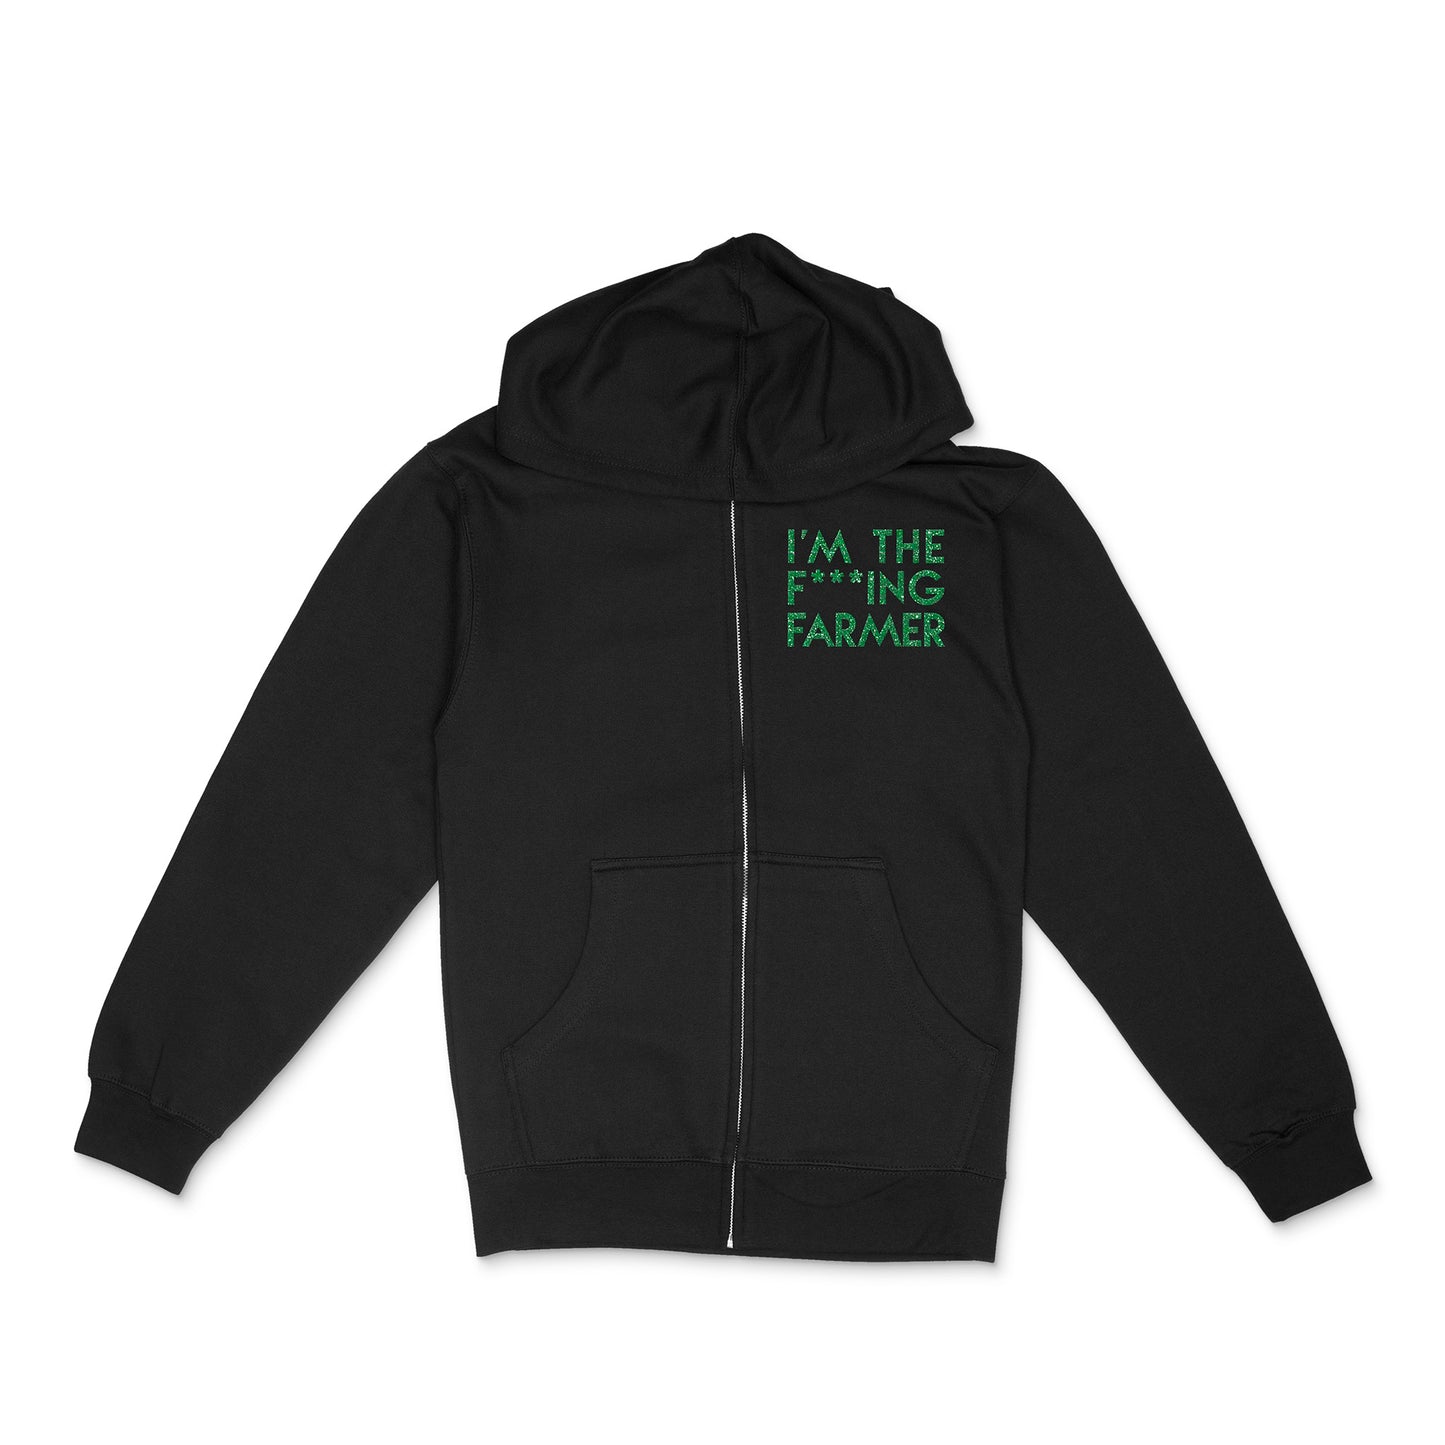 black unisex zip hoodie with custom sample text "I'm The F***ing Farmer" in green glitter, geometric text style on left chest of garment